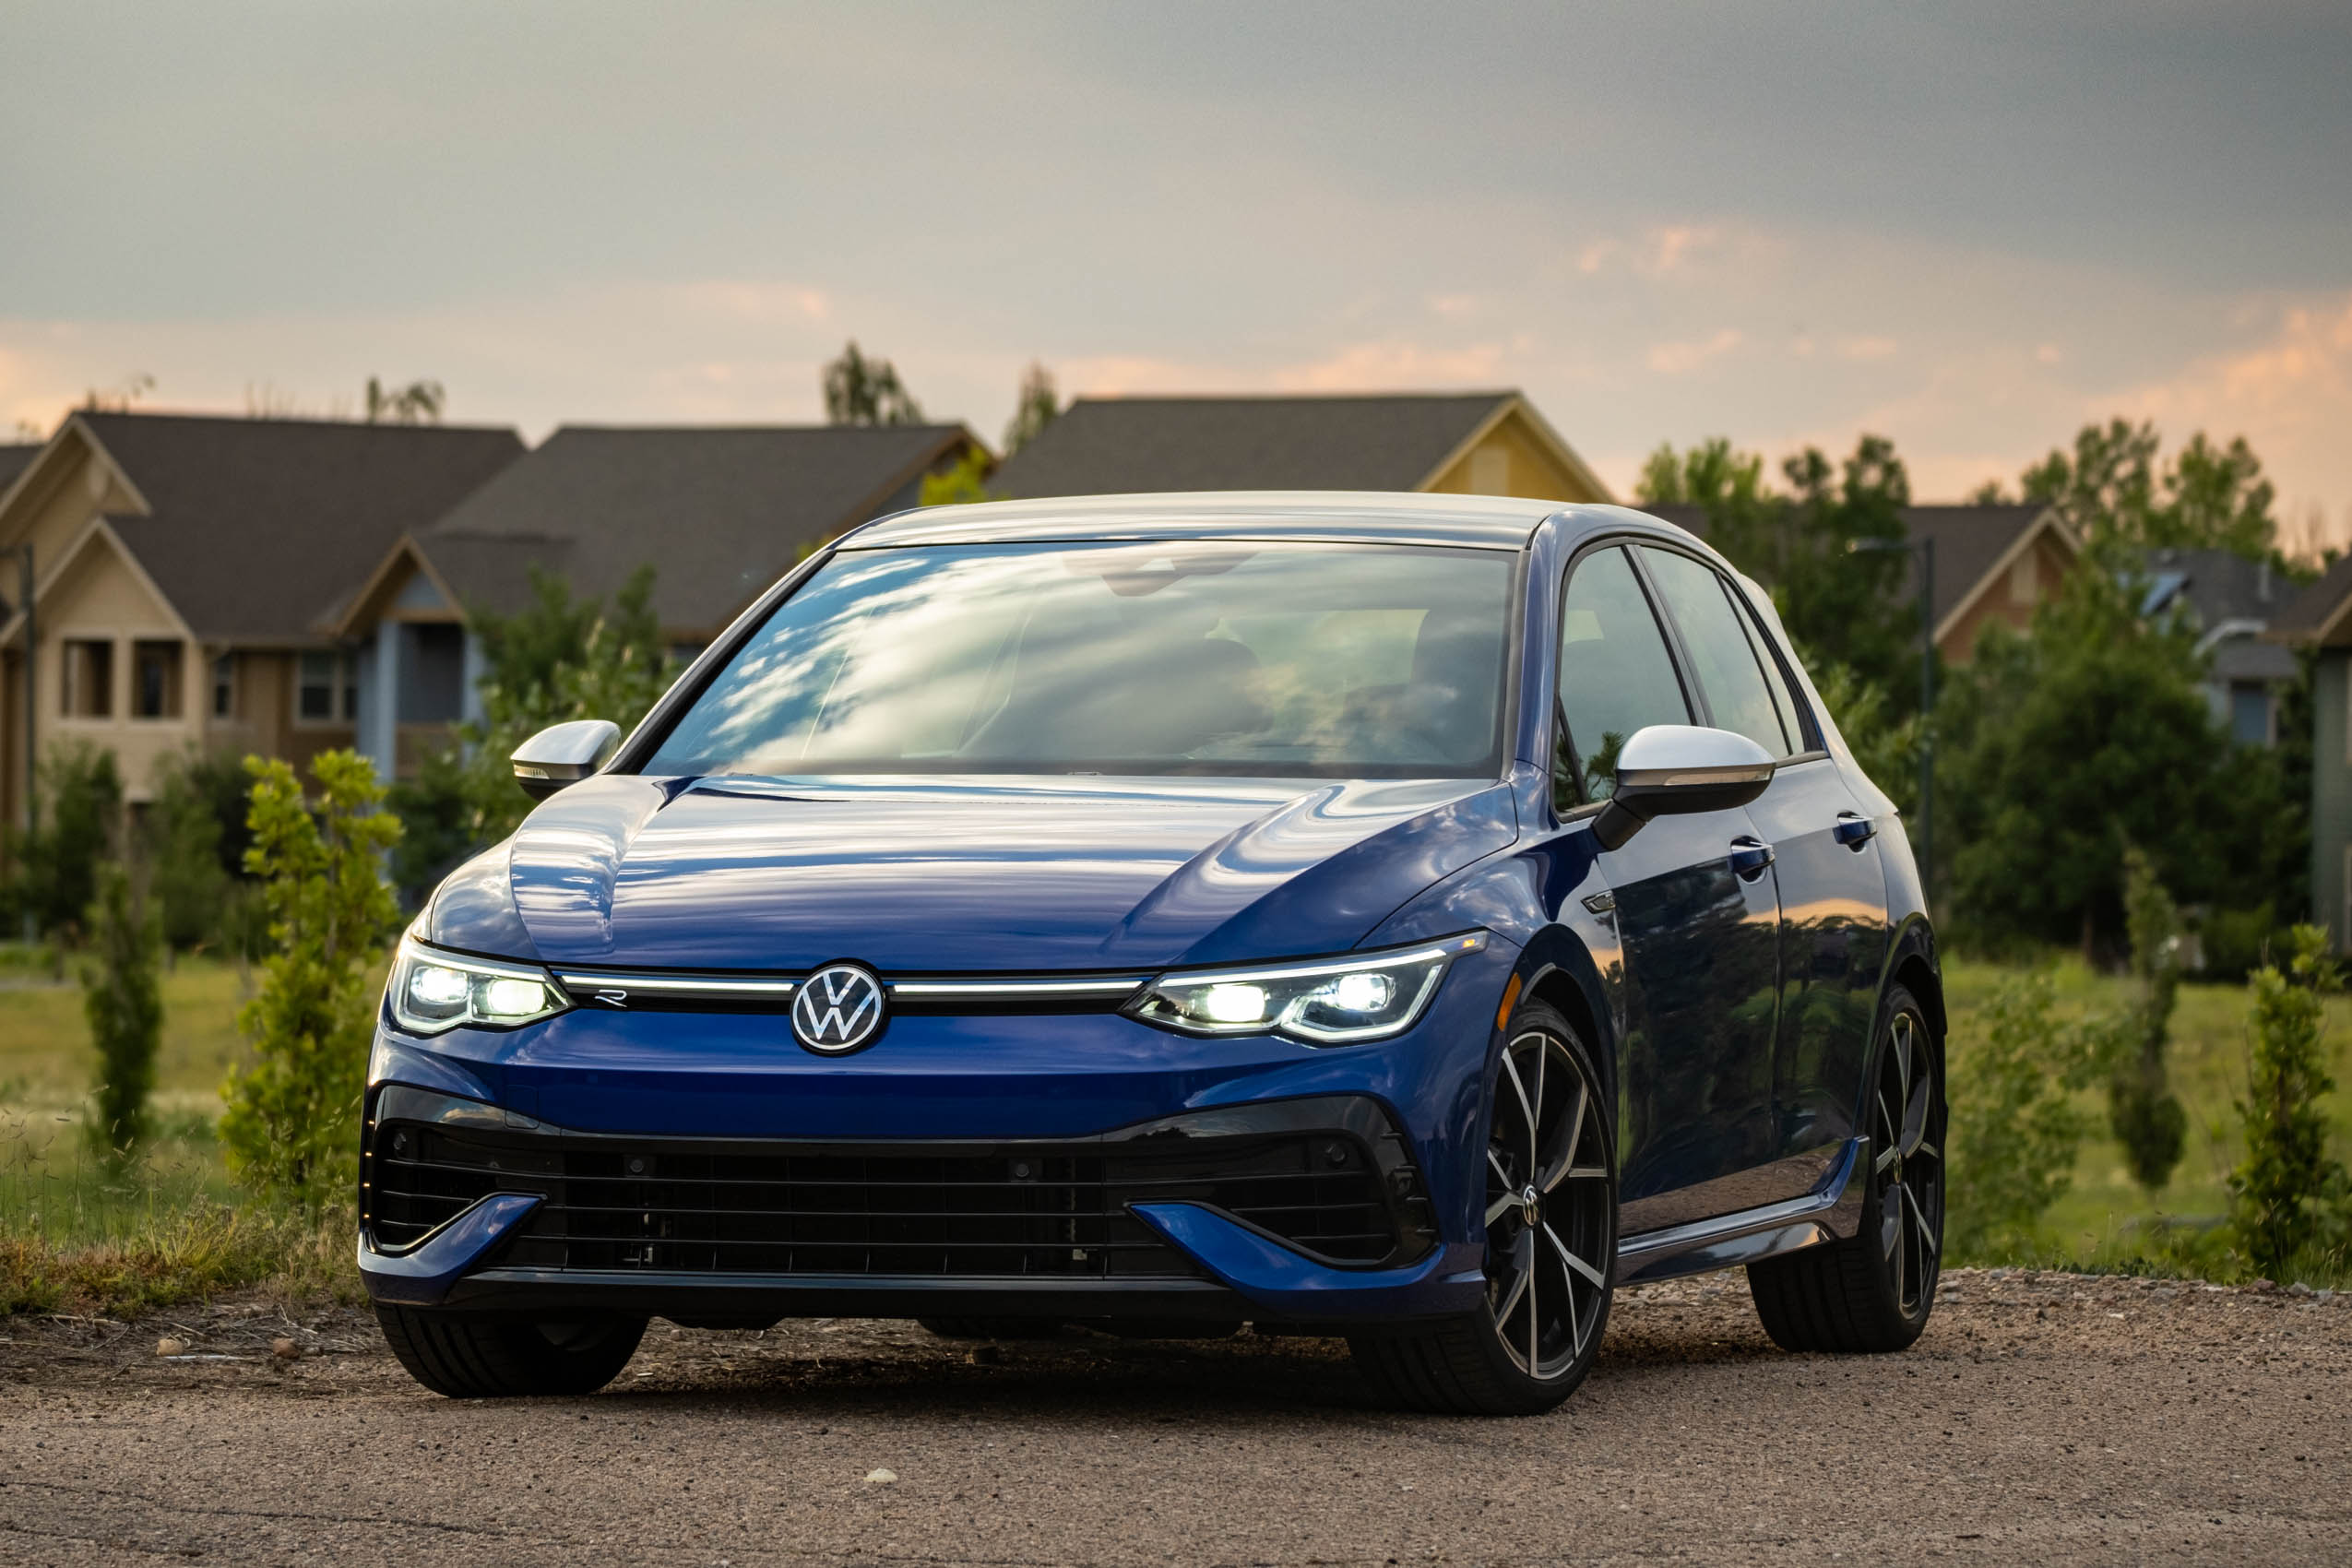 New 2020 Volkswagen Golf: first prices and specs announced